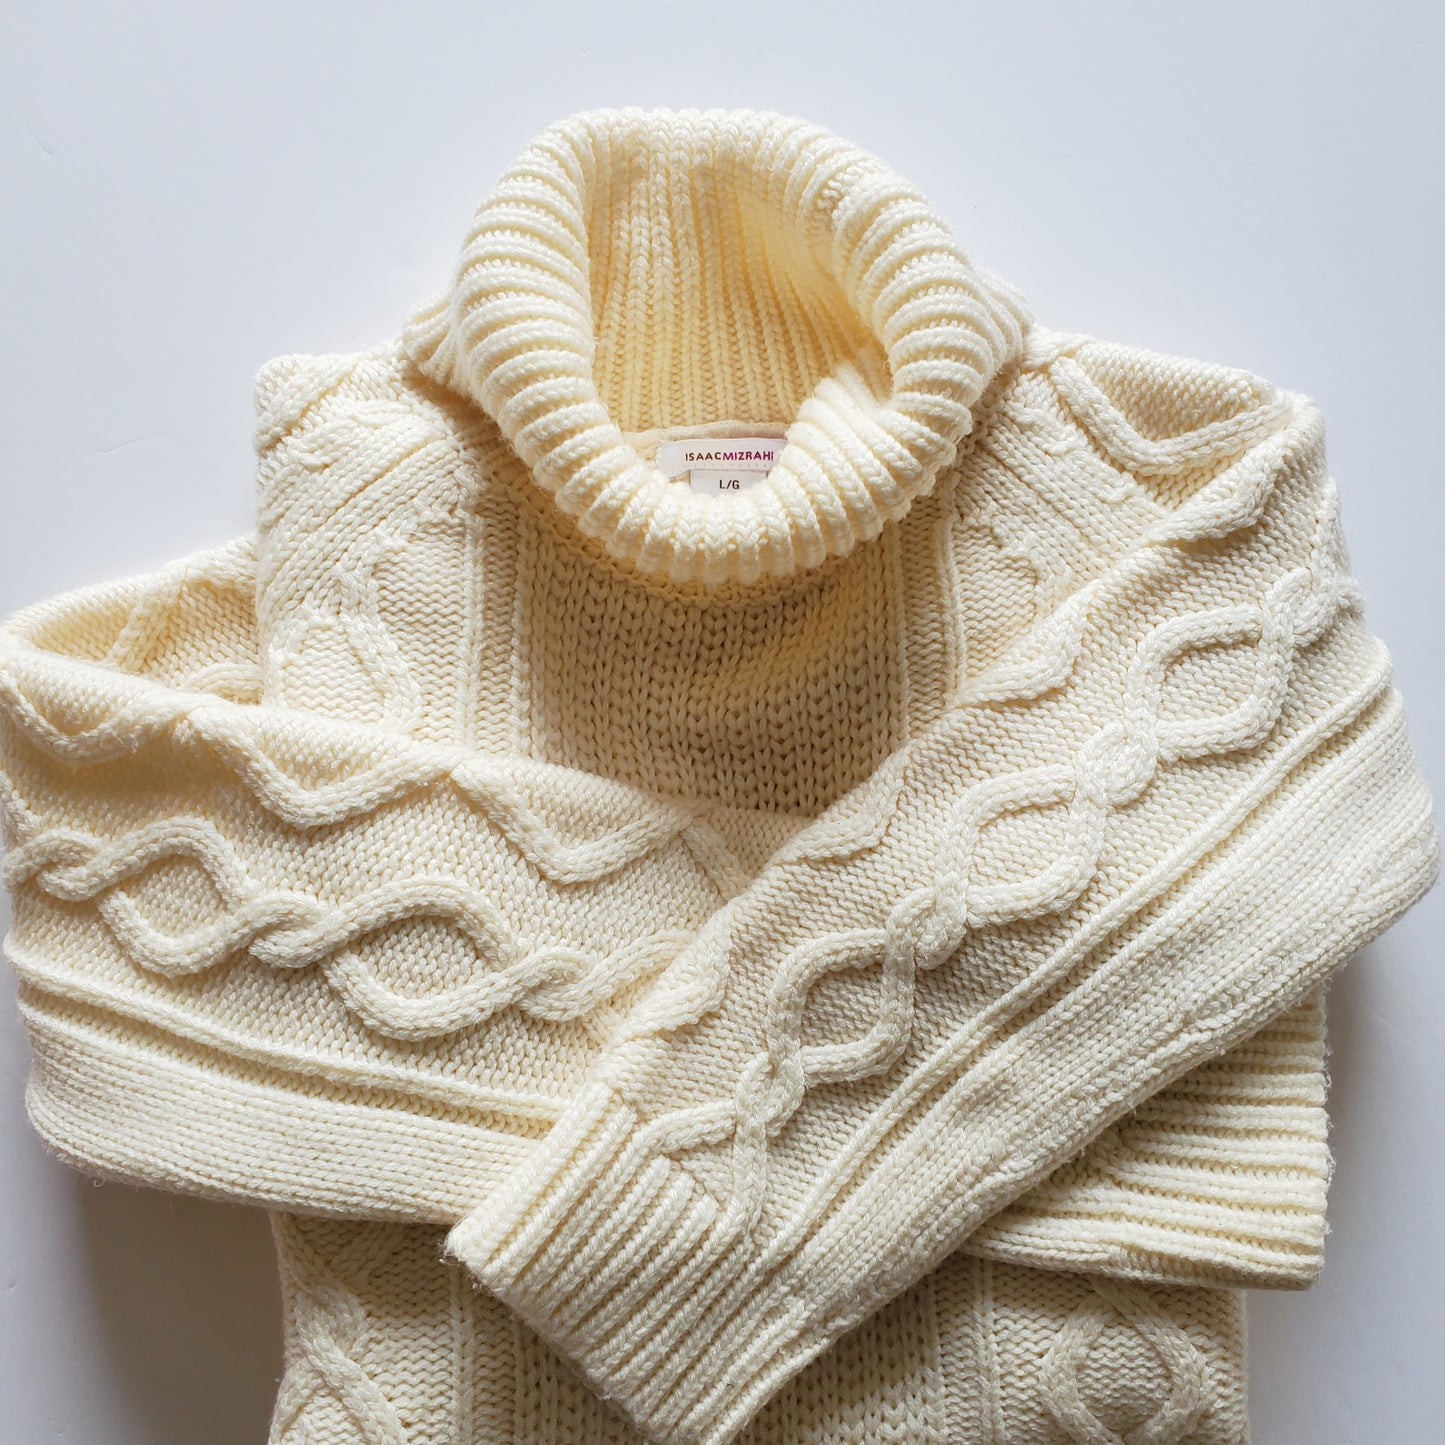 Classic cable knit sweater